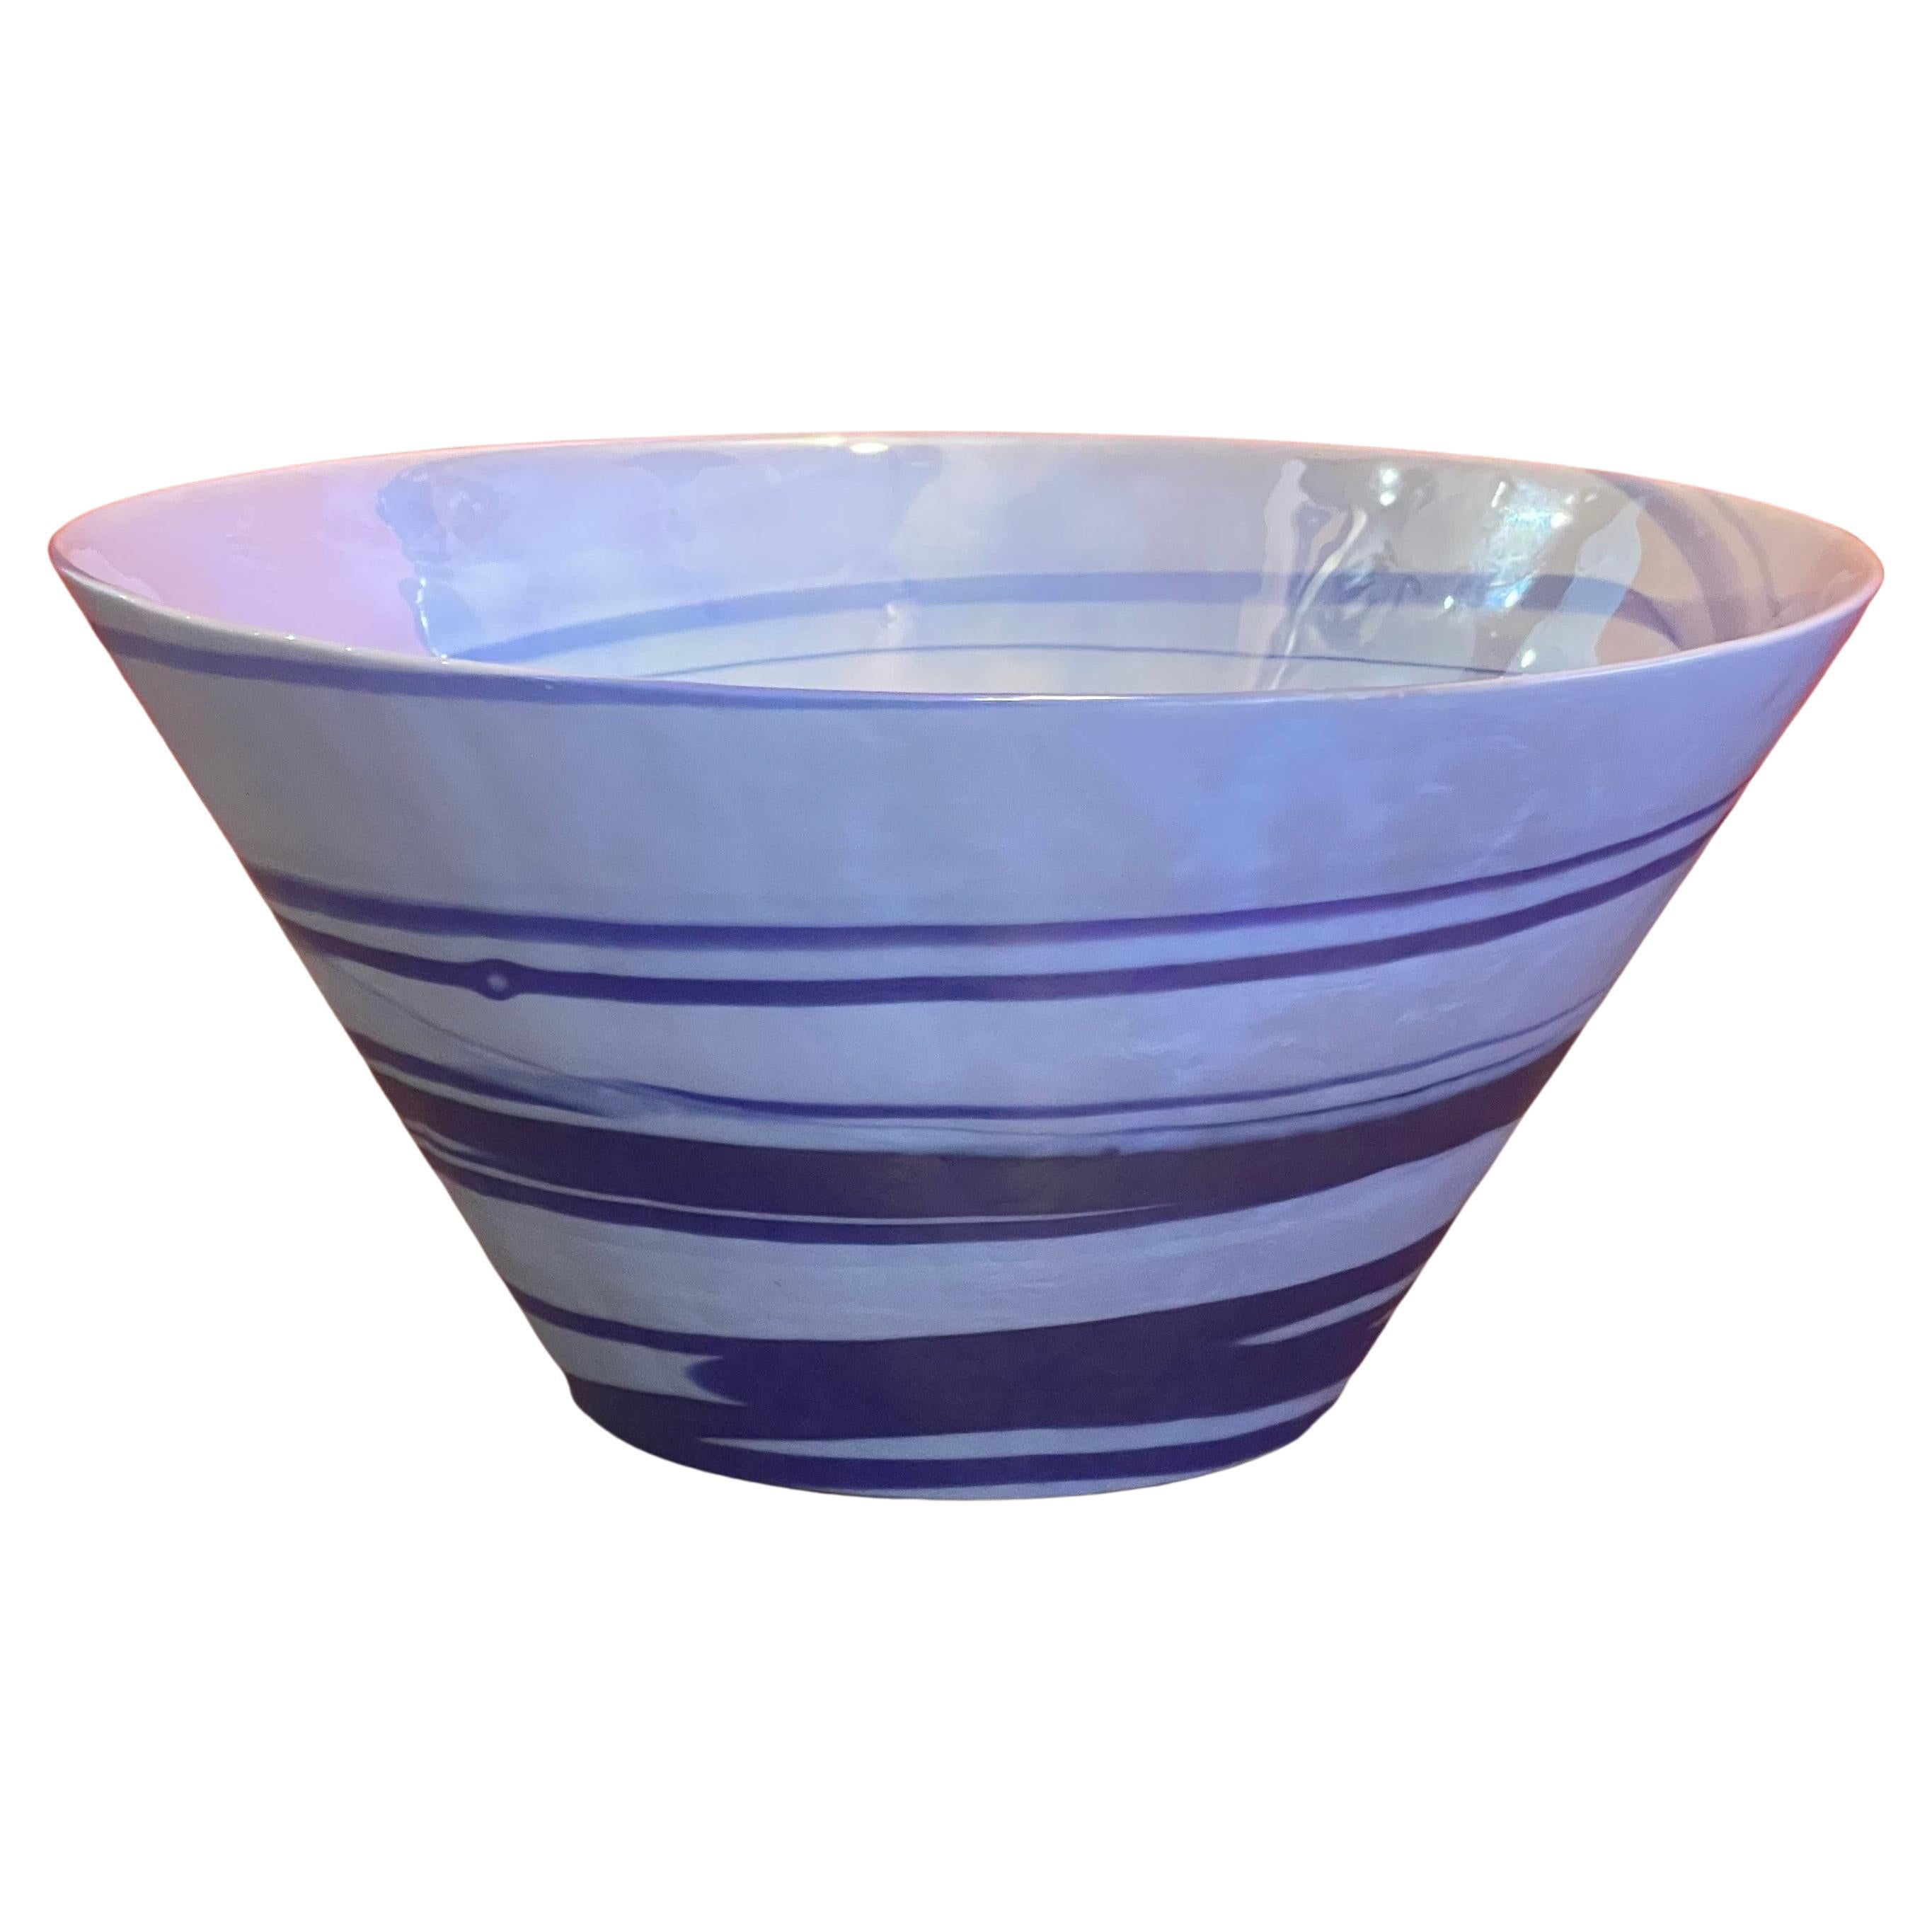 Centerpiece Bowl by Yalos Casa for Murano Glass